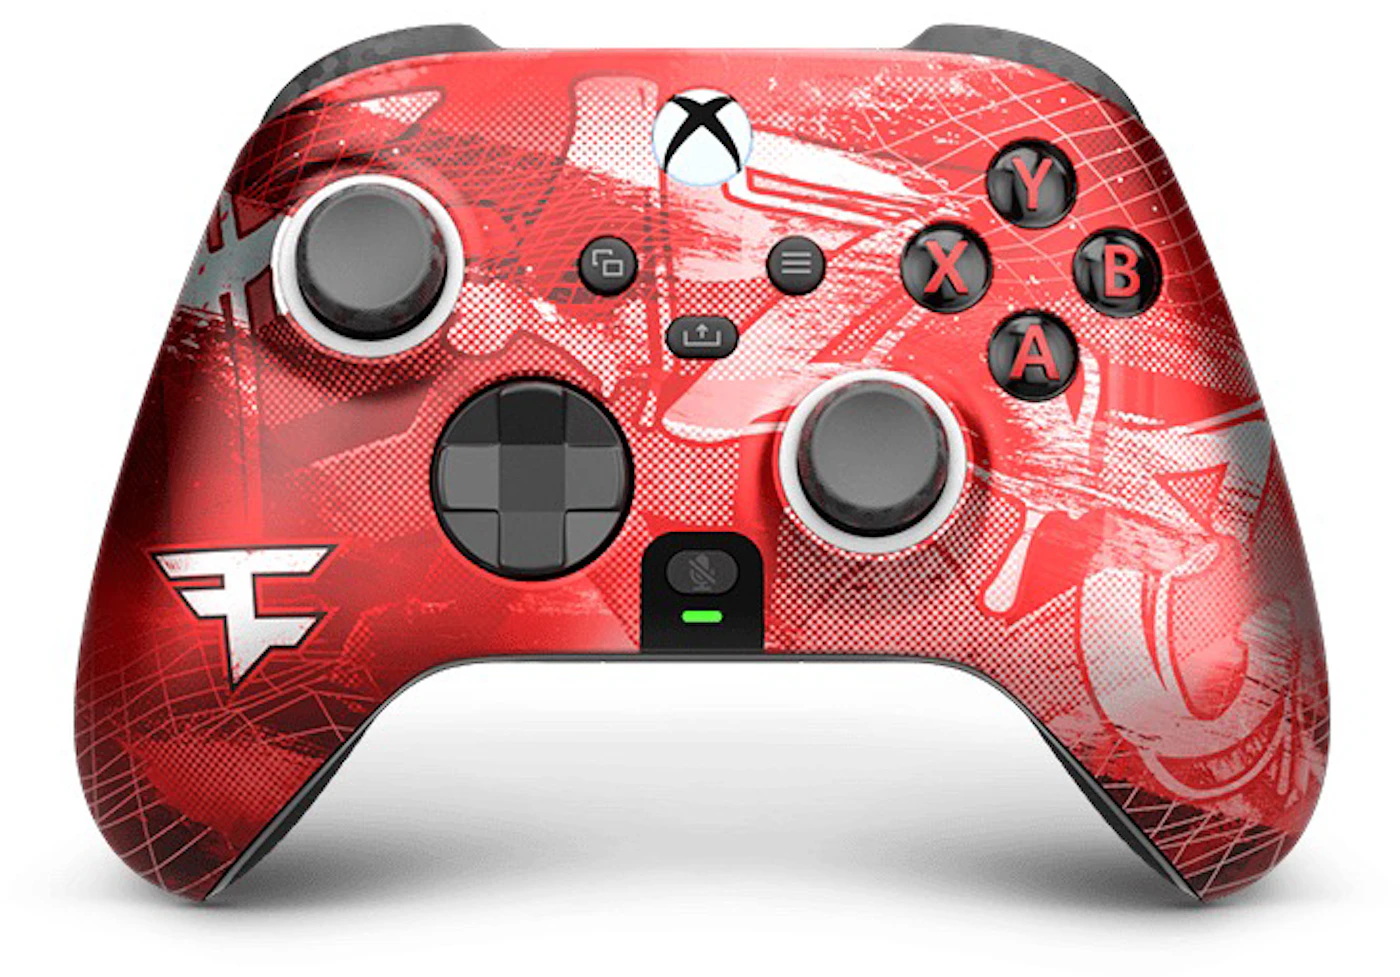 Scuf Gaming - A new addition for 2019. The FaZe Clan design is here for the  SCUF IMPACT! scuf.co/fazescufb